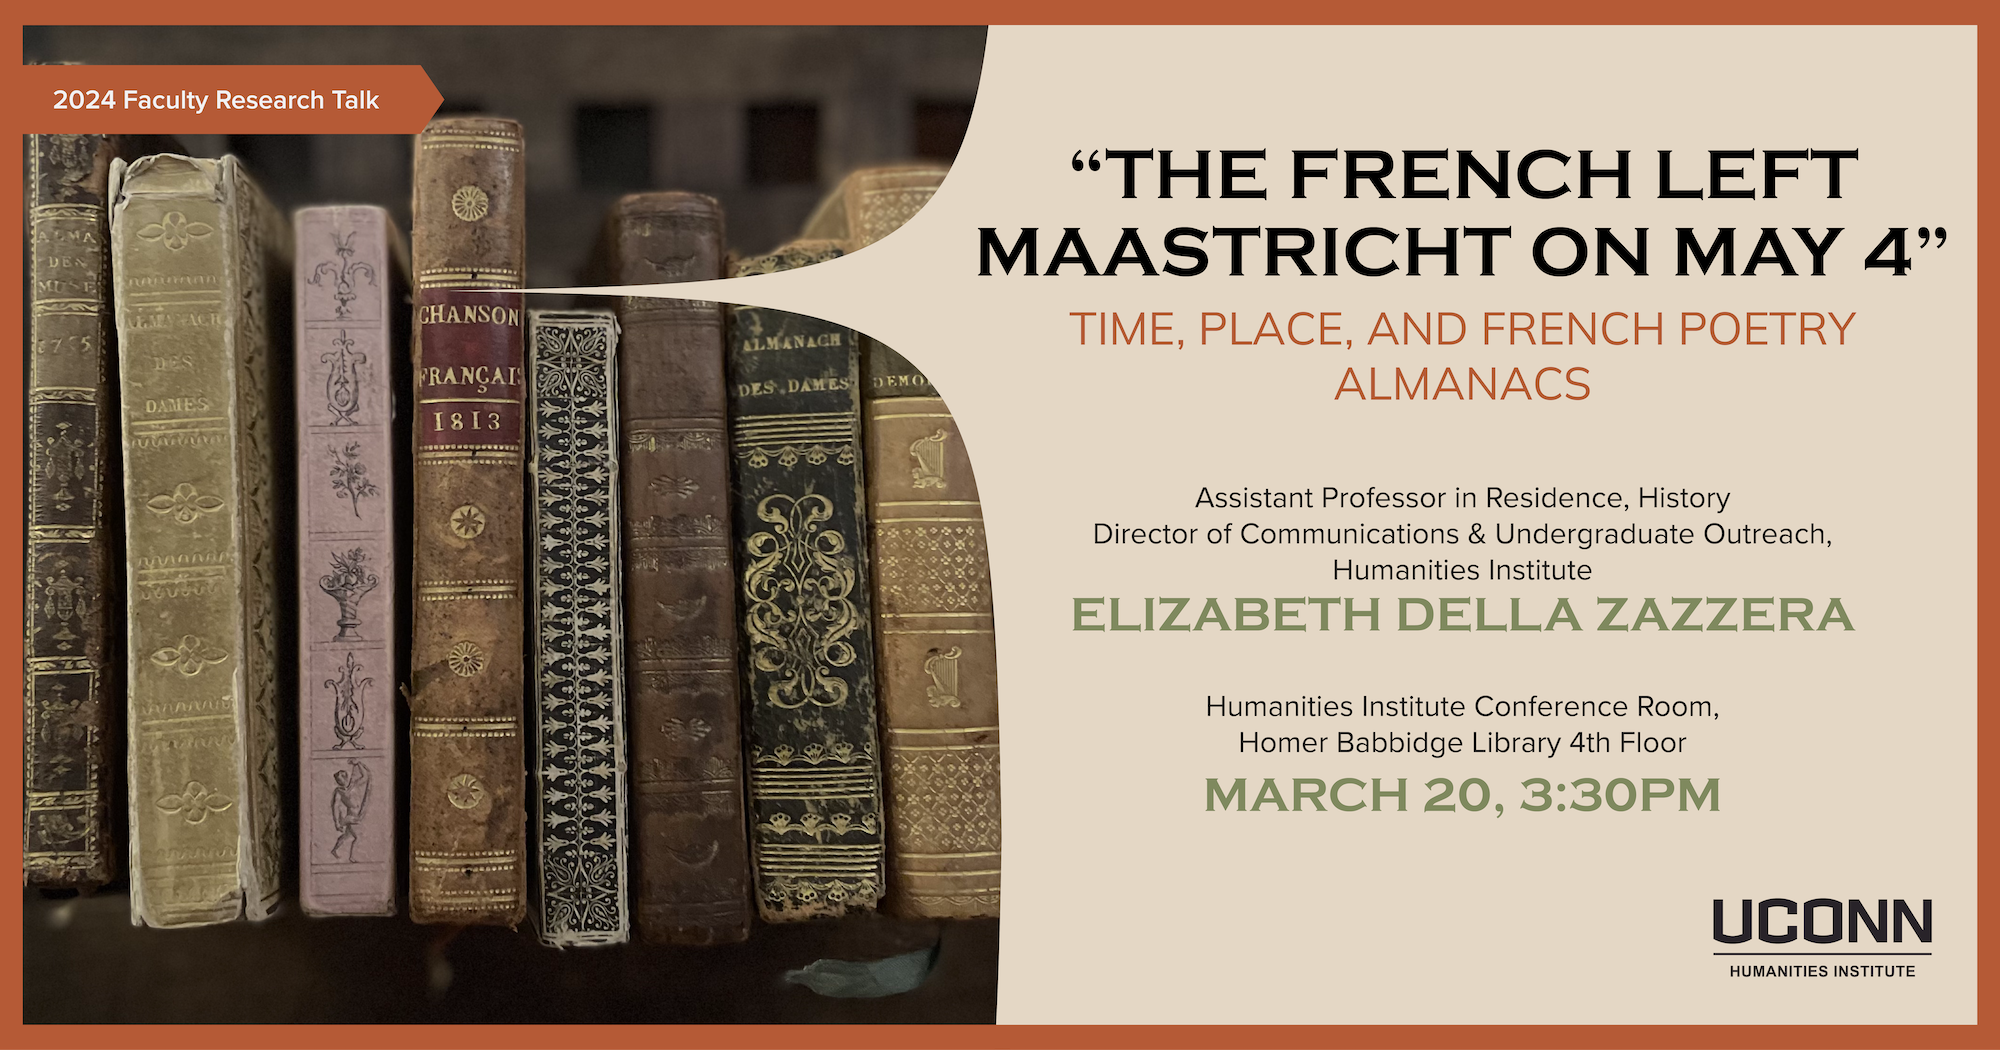 2024 Faculty Talk "The French Left Maastricht on May 4": Time, Place, and French Poetry Almanacs. Assistant Professor in Residence, History, Elizabeth Della Zazzera. Humanities Institute Conference Room, Homer Babbidge Library, March 20, 2024, 3:30pm.